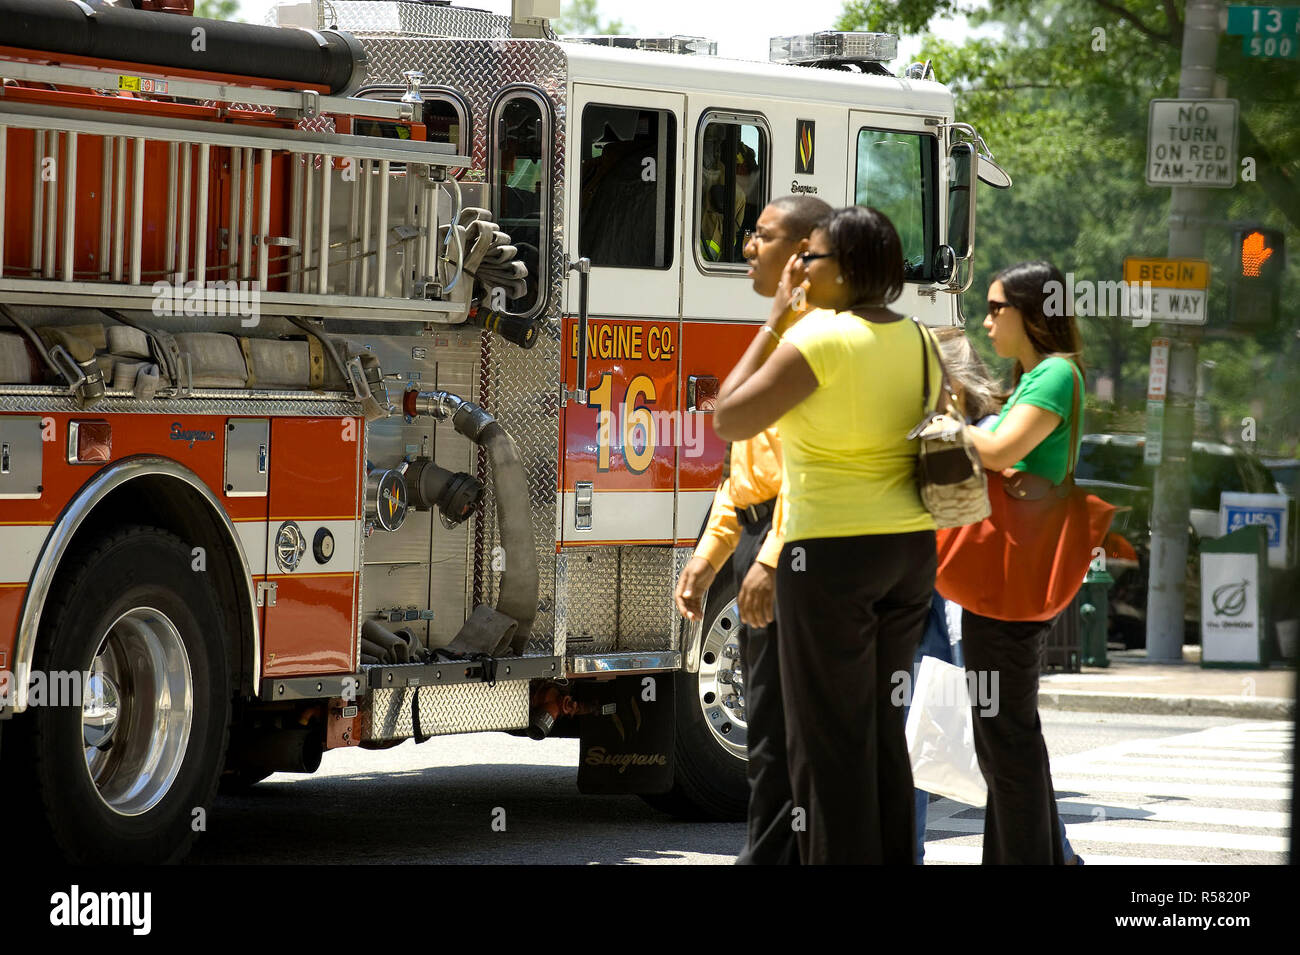 In this July 2008 photo, onlookers watch as a fire truck responds to a traffic accident Stock Photo